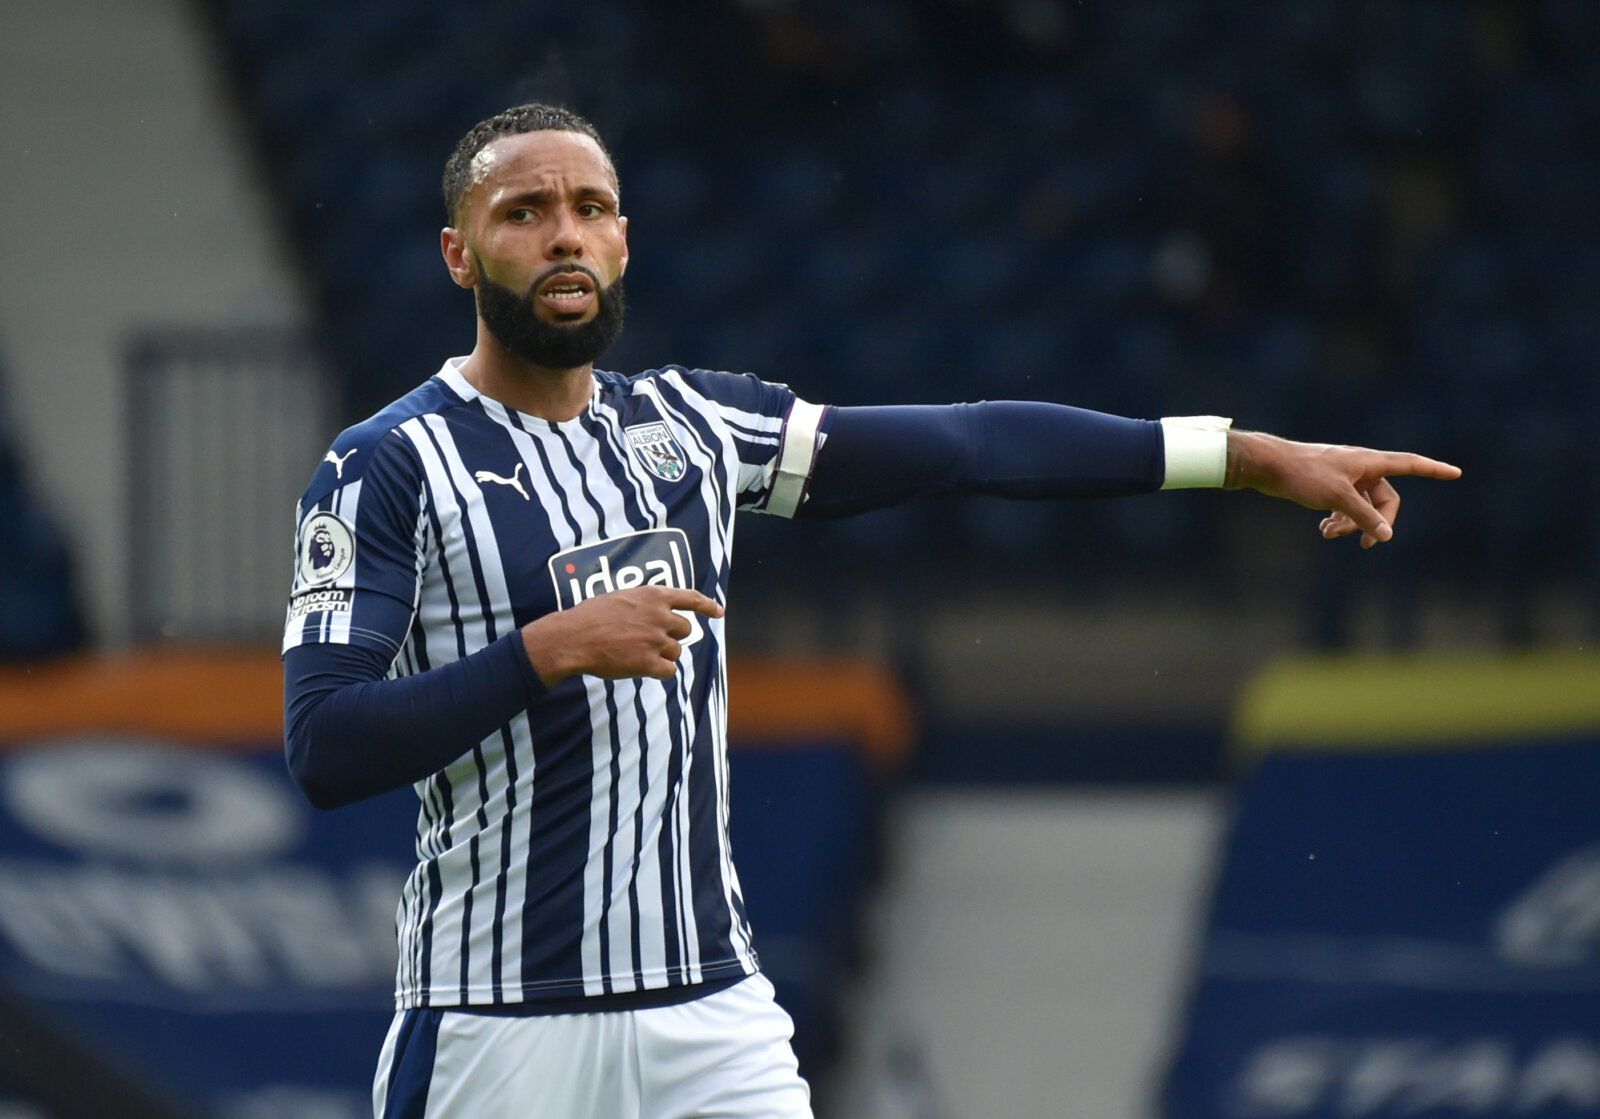 Soccer Football - Premier League - West Bromwich Albion v Liverpool - The Hawthorns, West Bromwich, Britain - May 16, 2021 West Bromwich Albion's Kyle Bartley reacts Pool via REUTERS/Rui Vieira EDITORIAL USE ONLY. No use with unauthorized audio, video, data, fixture lists, club/league logos or 'live' services. Online in-match use limited to 75 images, no video emulation. No use in betting, games or single club /league/player publications.  Please contact your account representative for further d